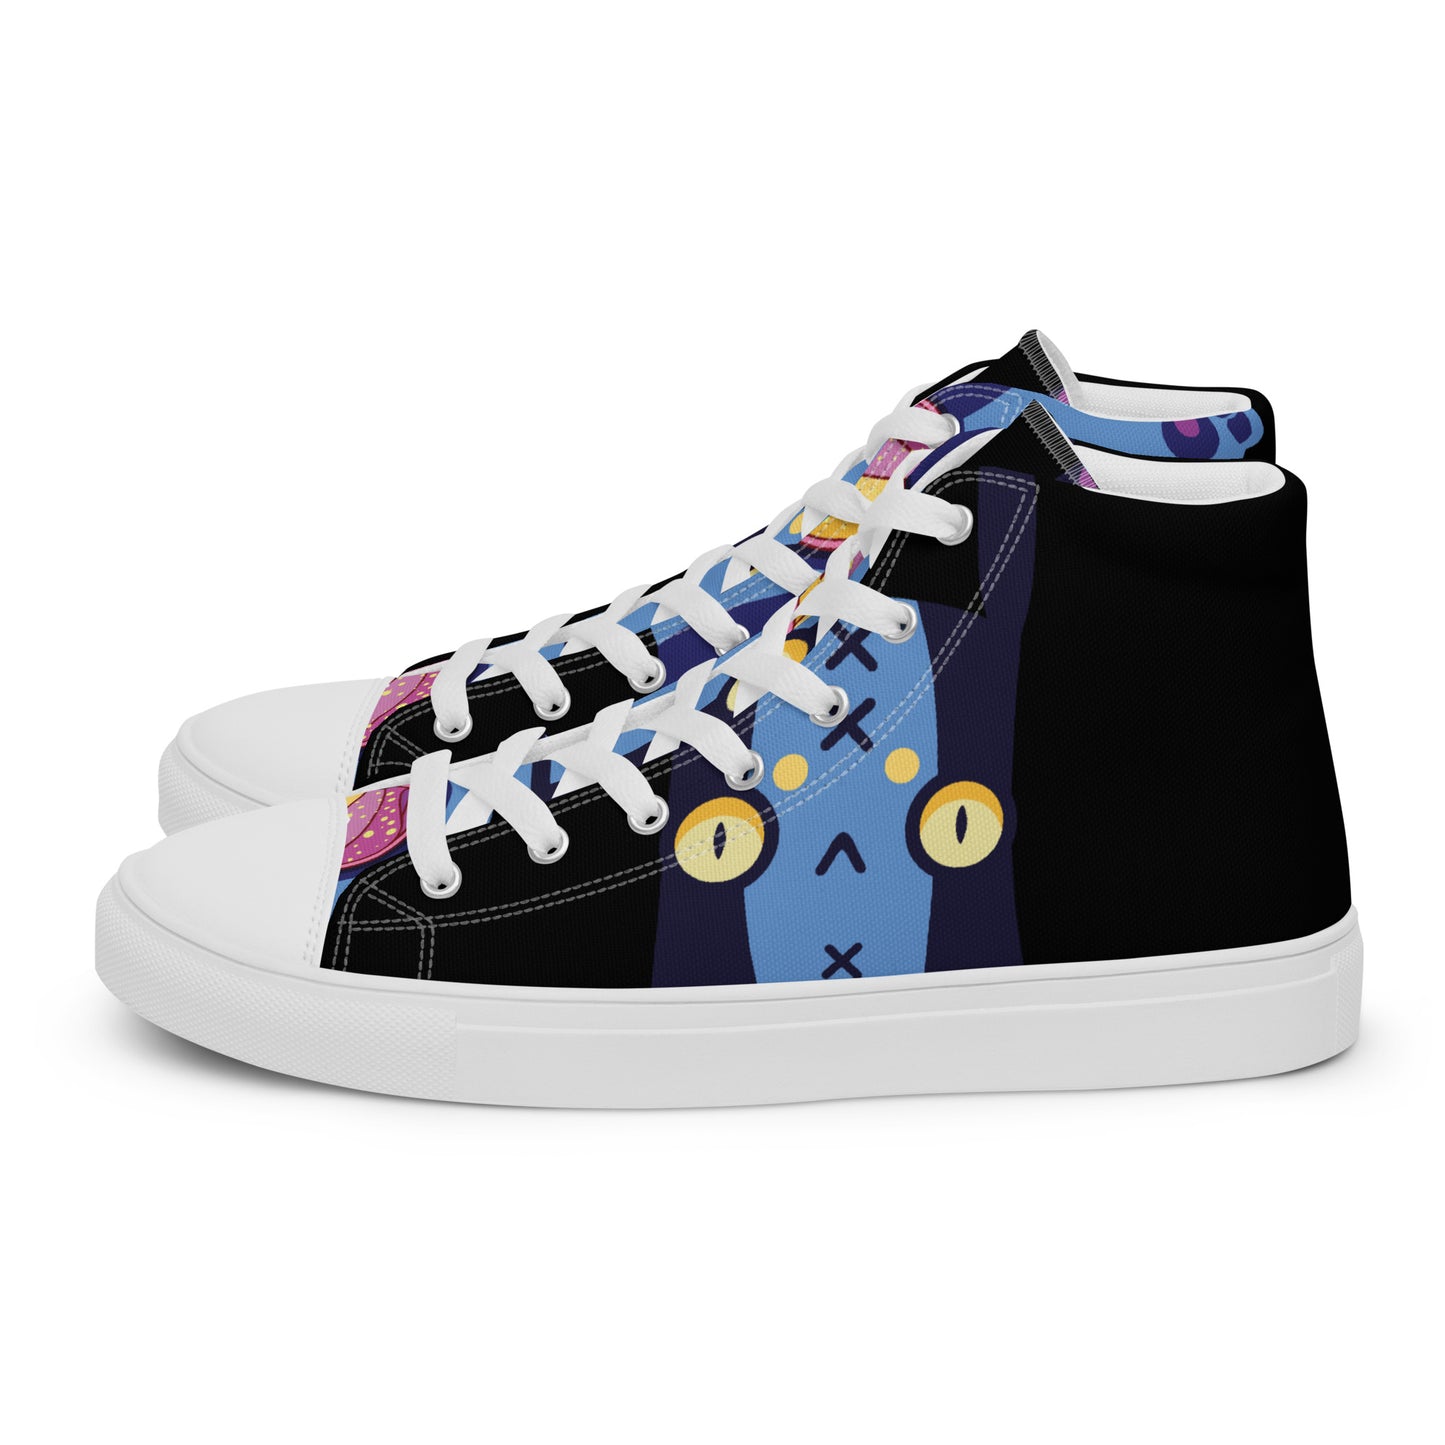 Ushkee Scout Women’s high top canvas shoes